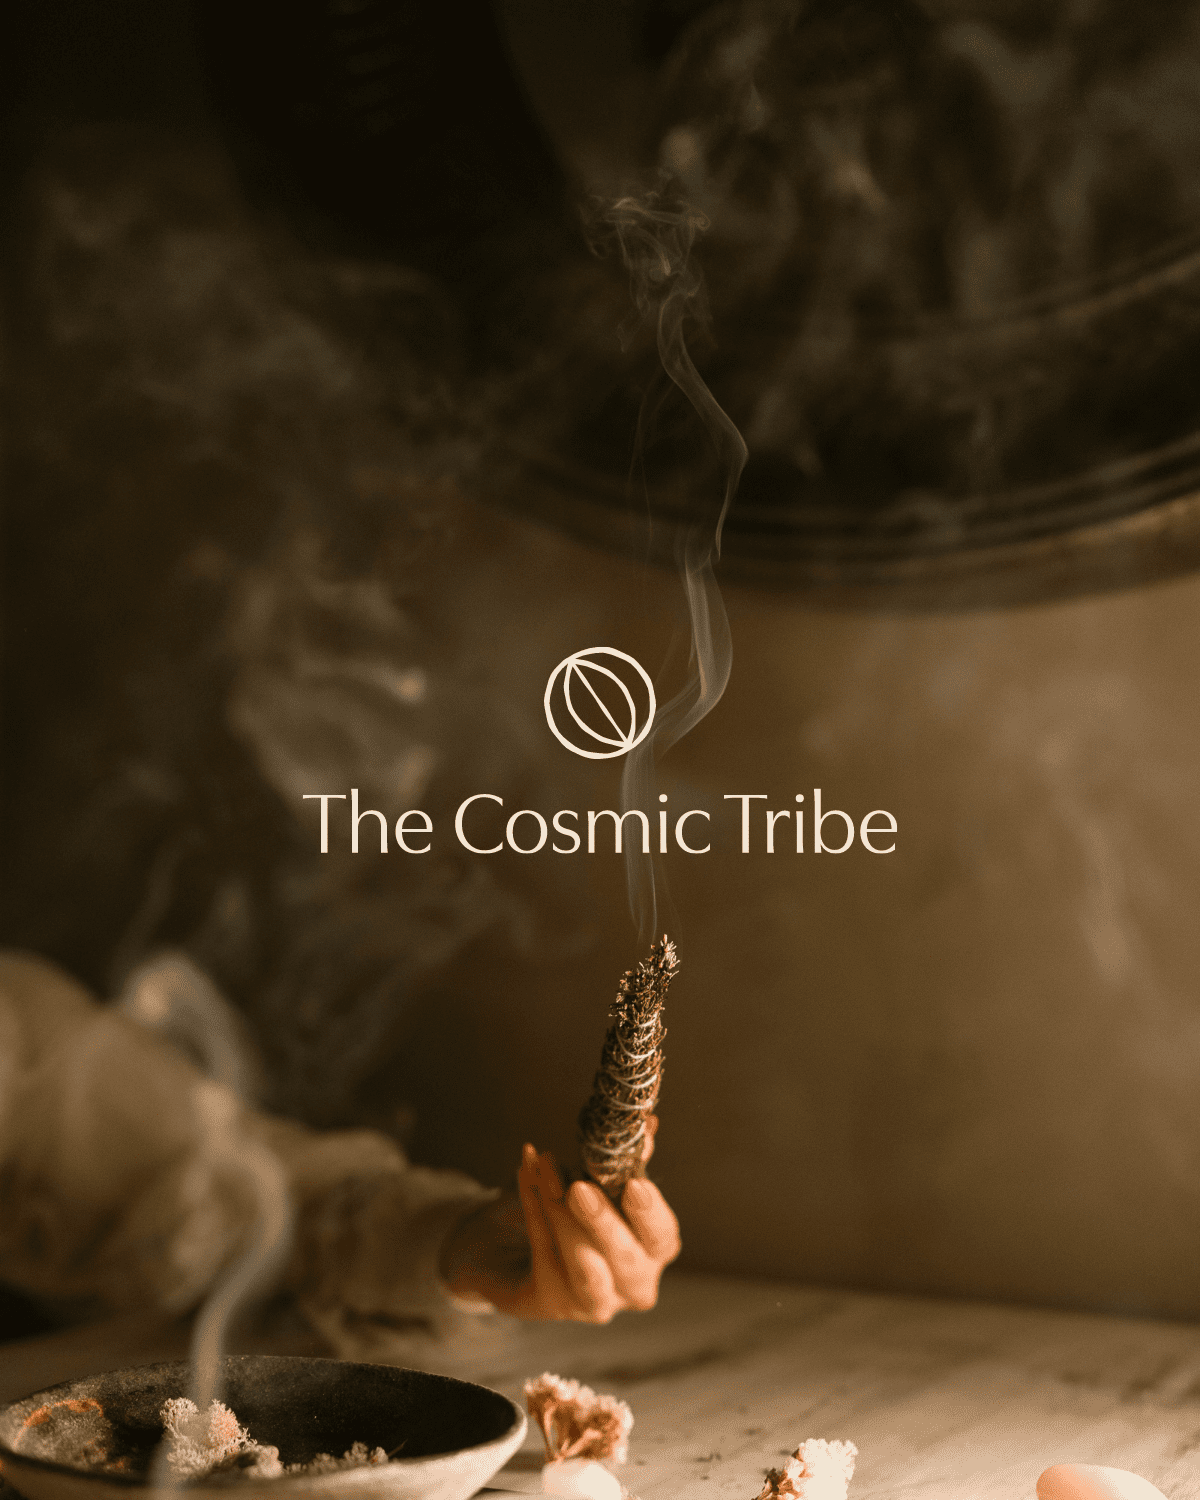 The Cosmic Tribe